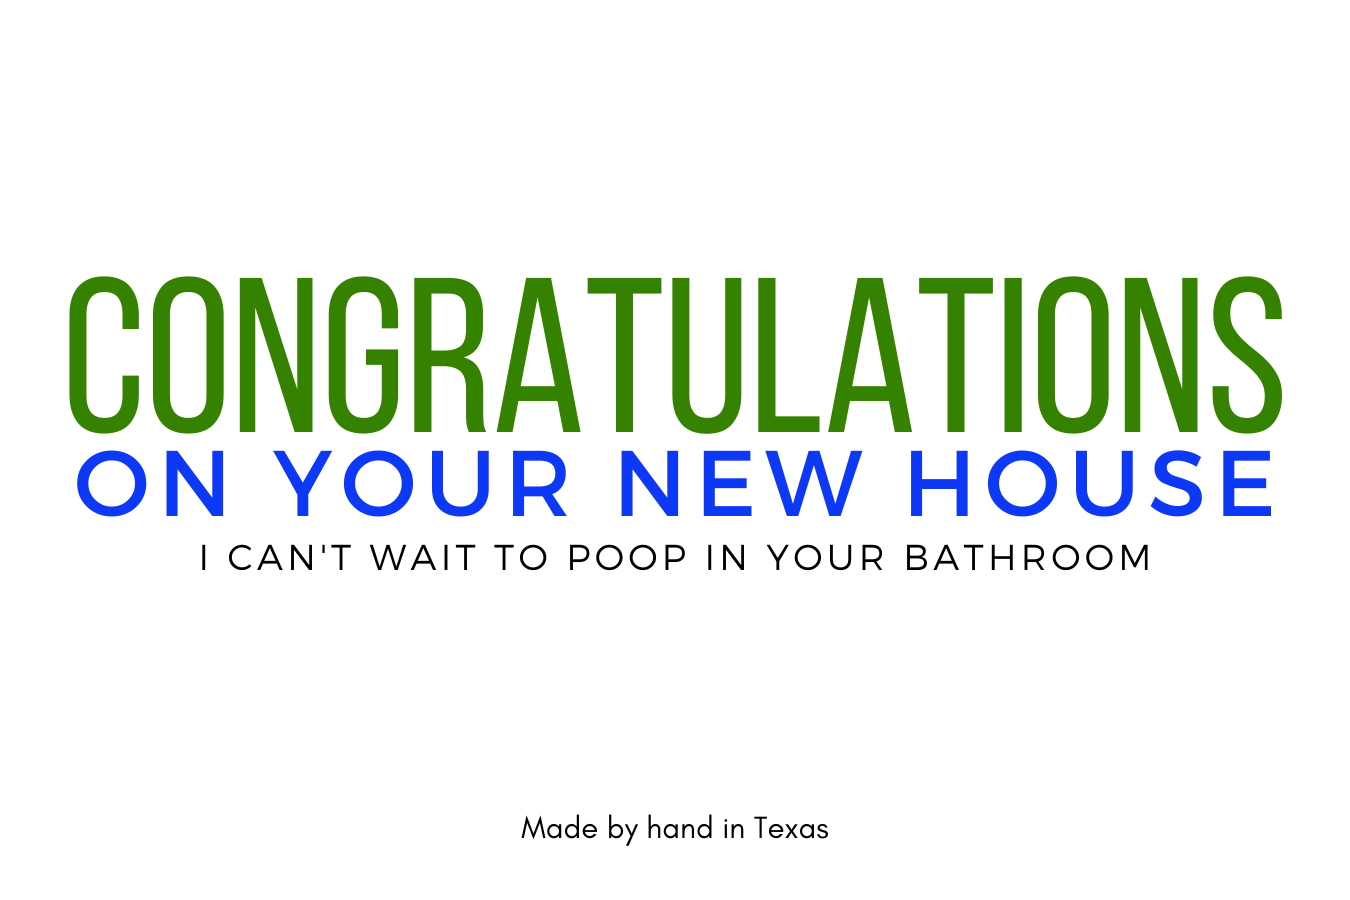 Congratulations on your new home, I can't wait to poop in your bathroom.